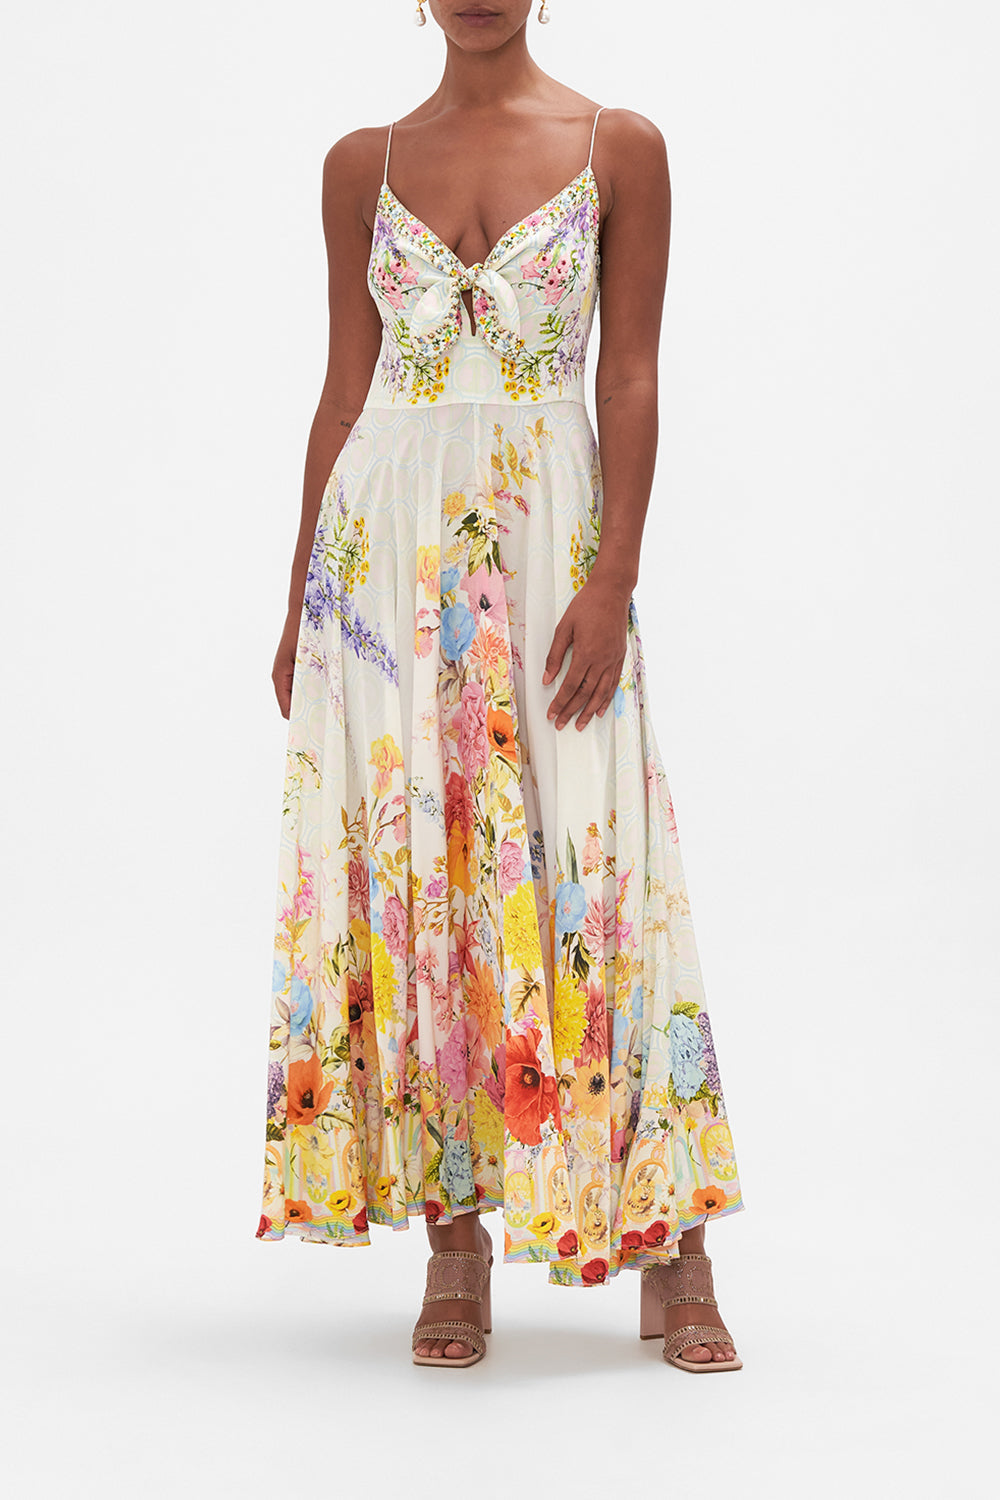 Long Dress With Tie Front Sunlight Symphony print by CAMILLA